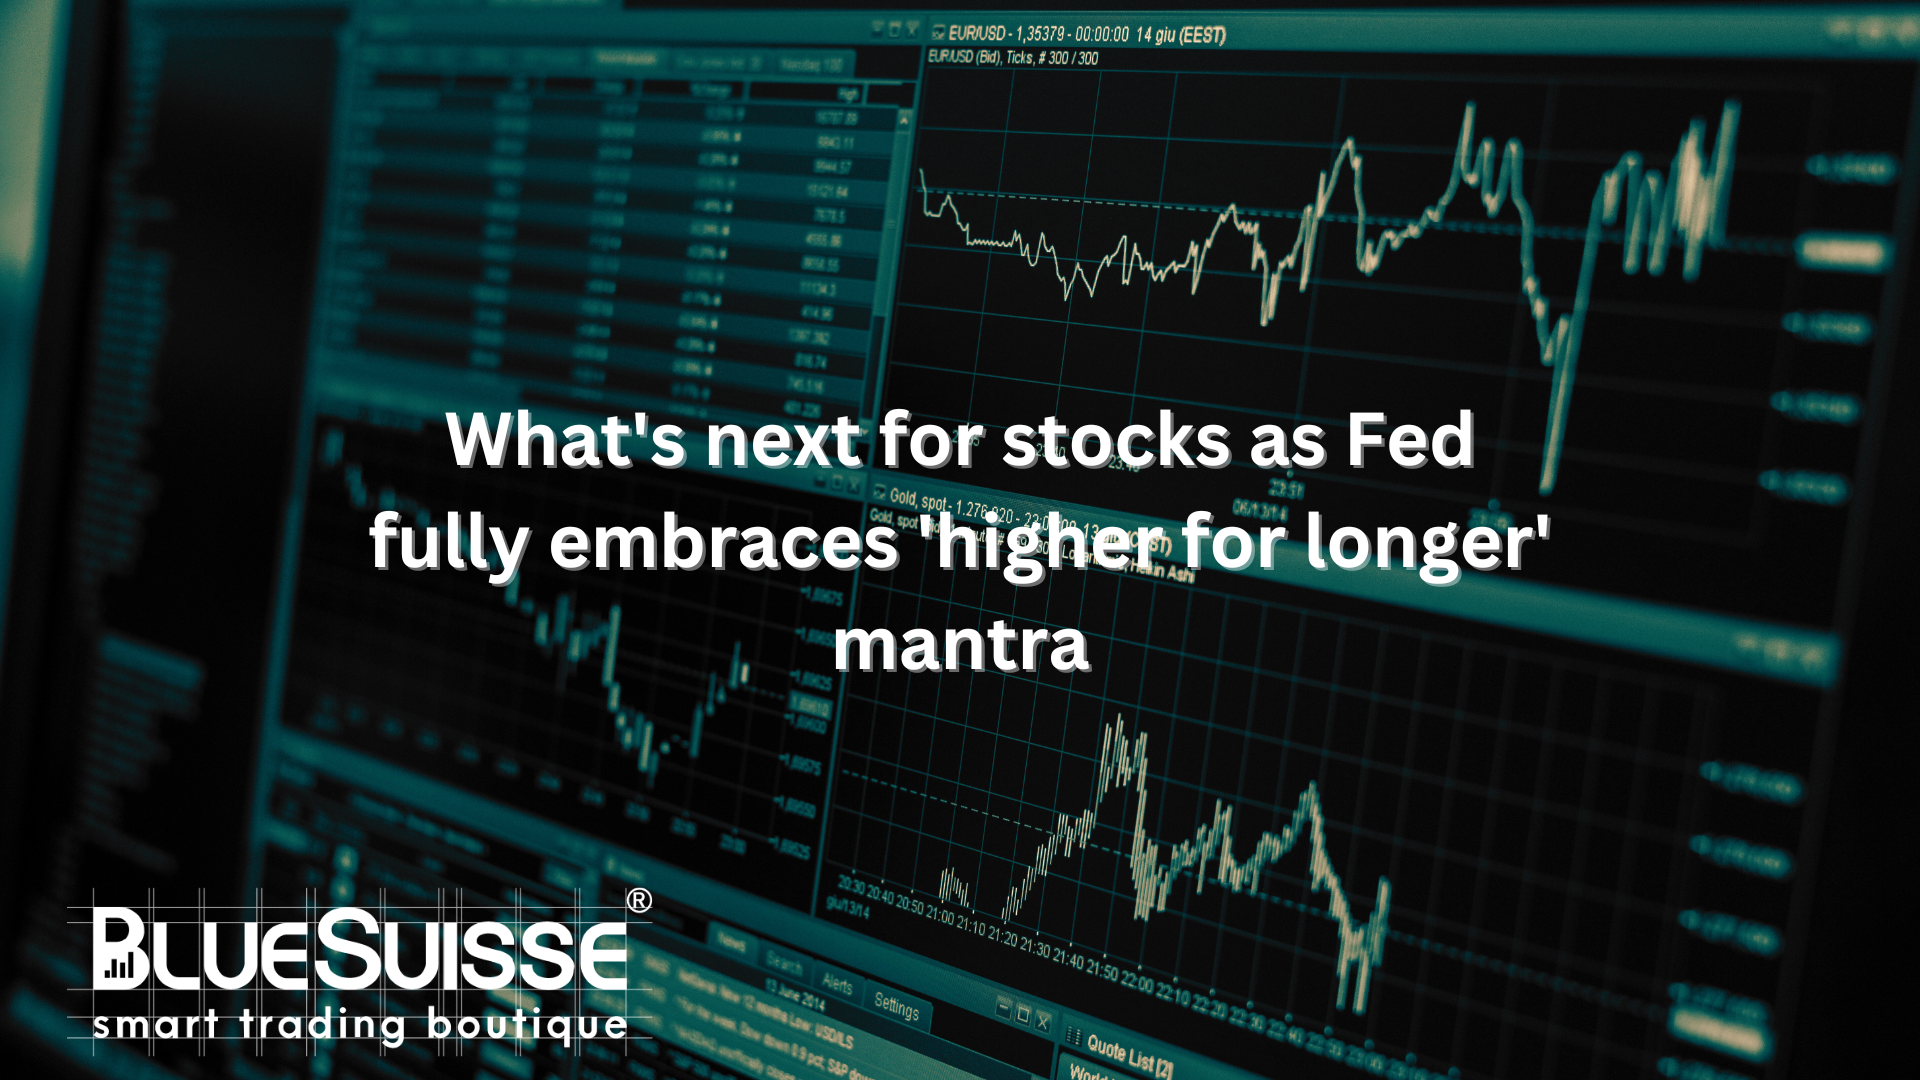 What’s next for stocks as Fed fully embraces ‘higher for longer’ mantra